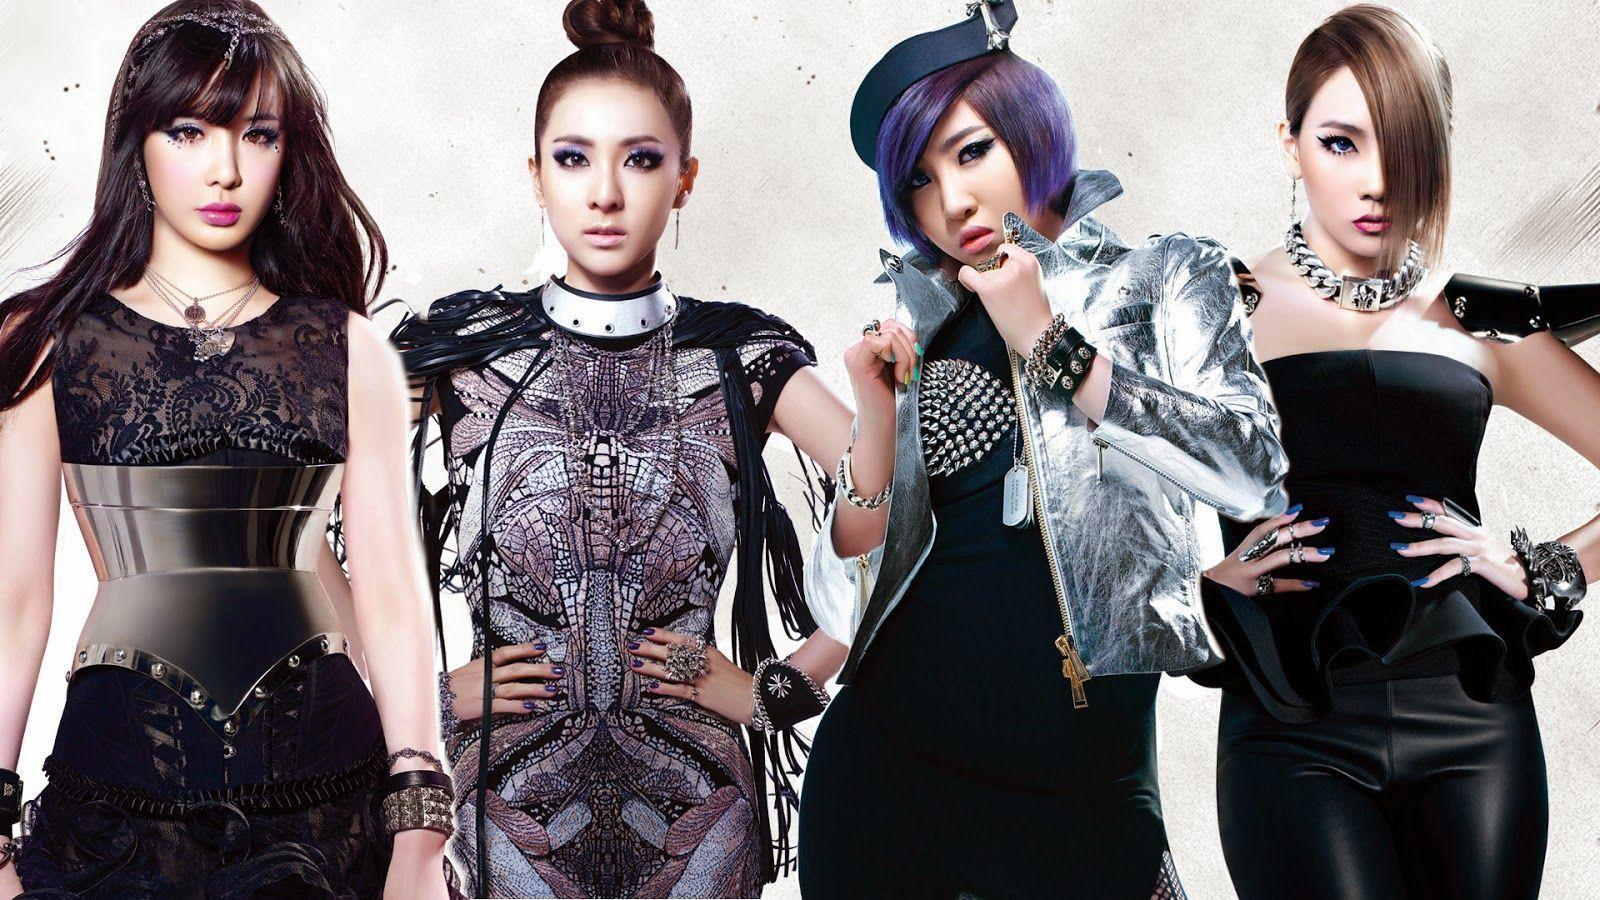 2NE1 HD wallpaper. Most beautiful places in the world. Download